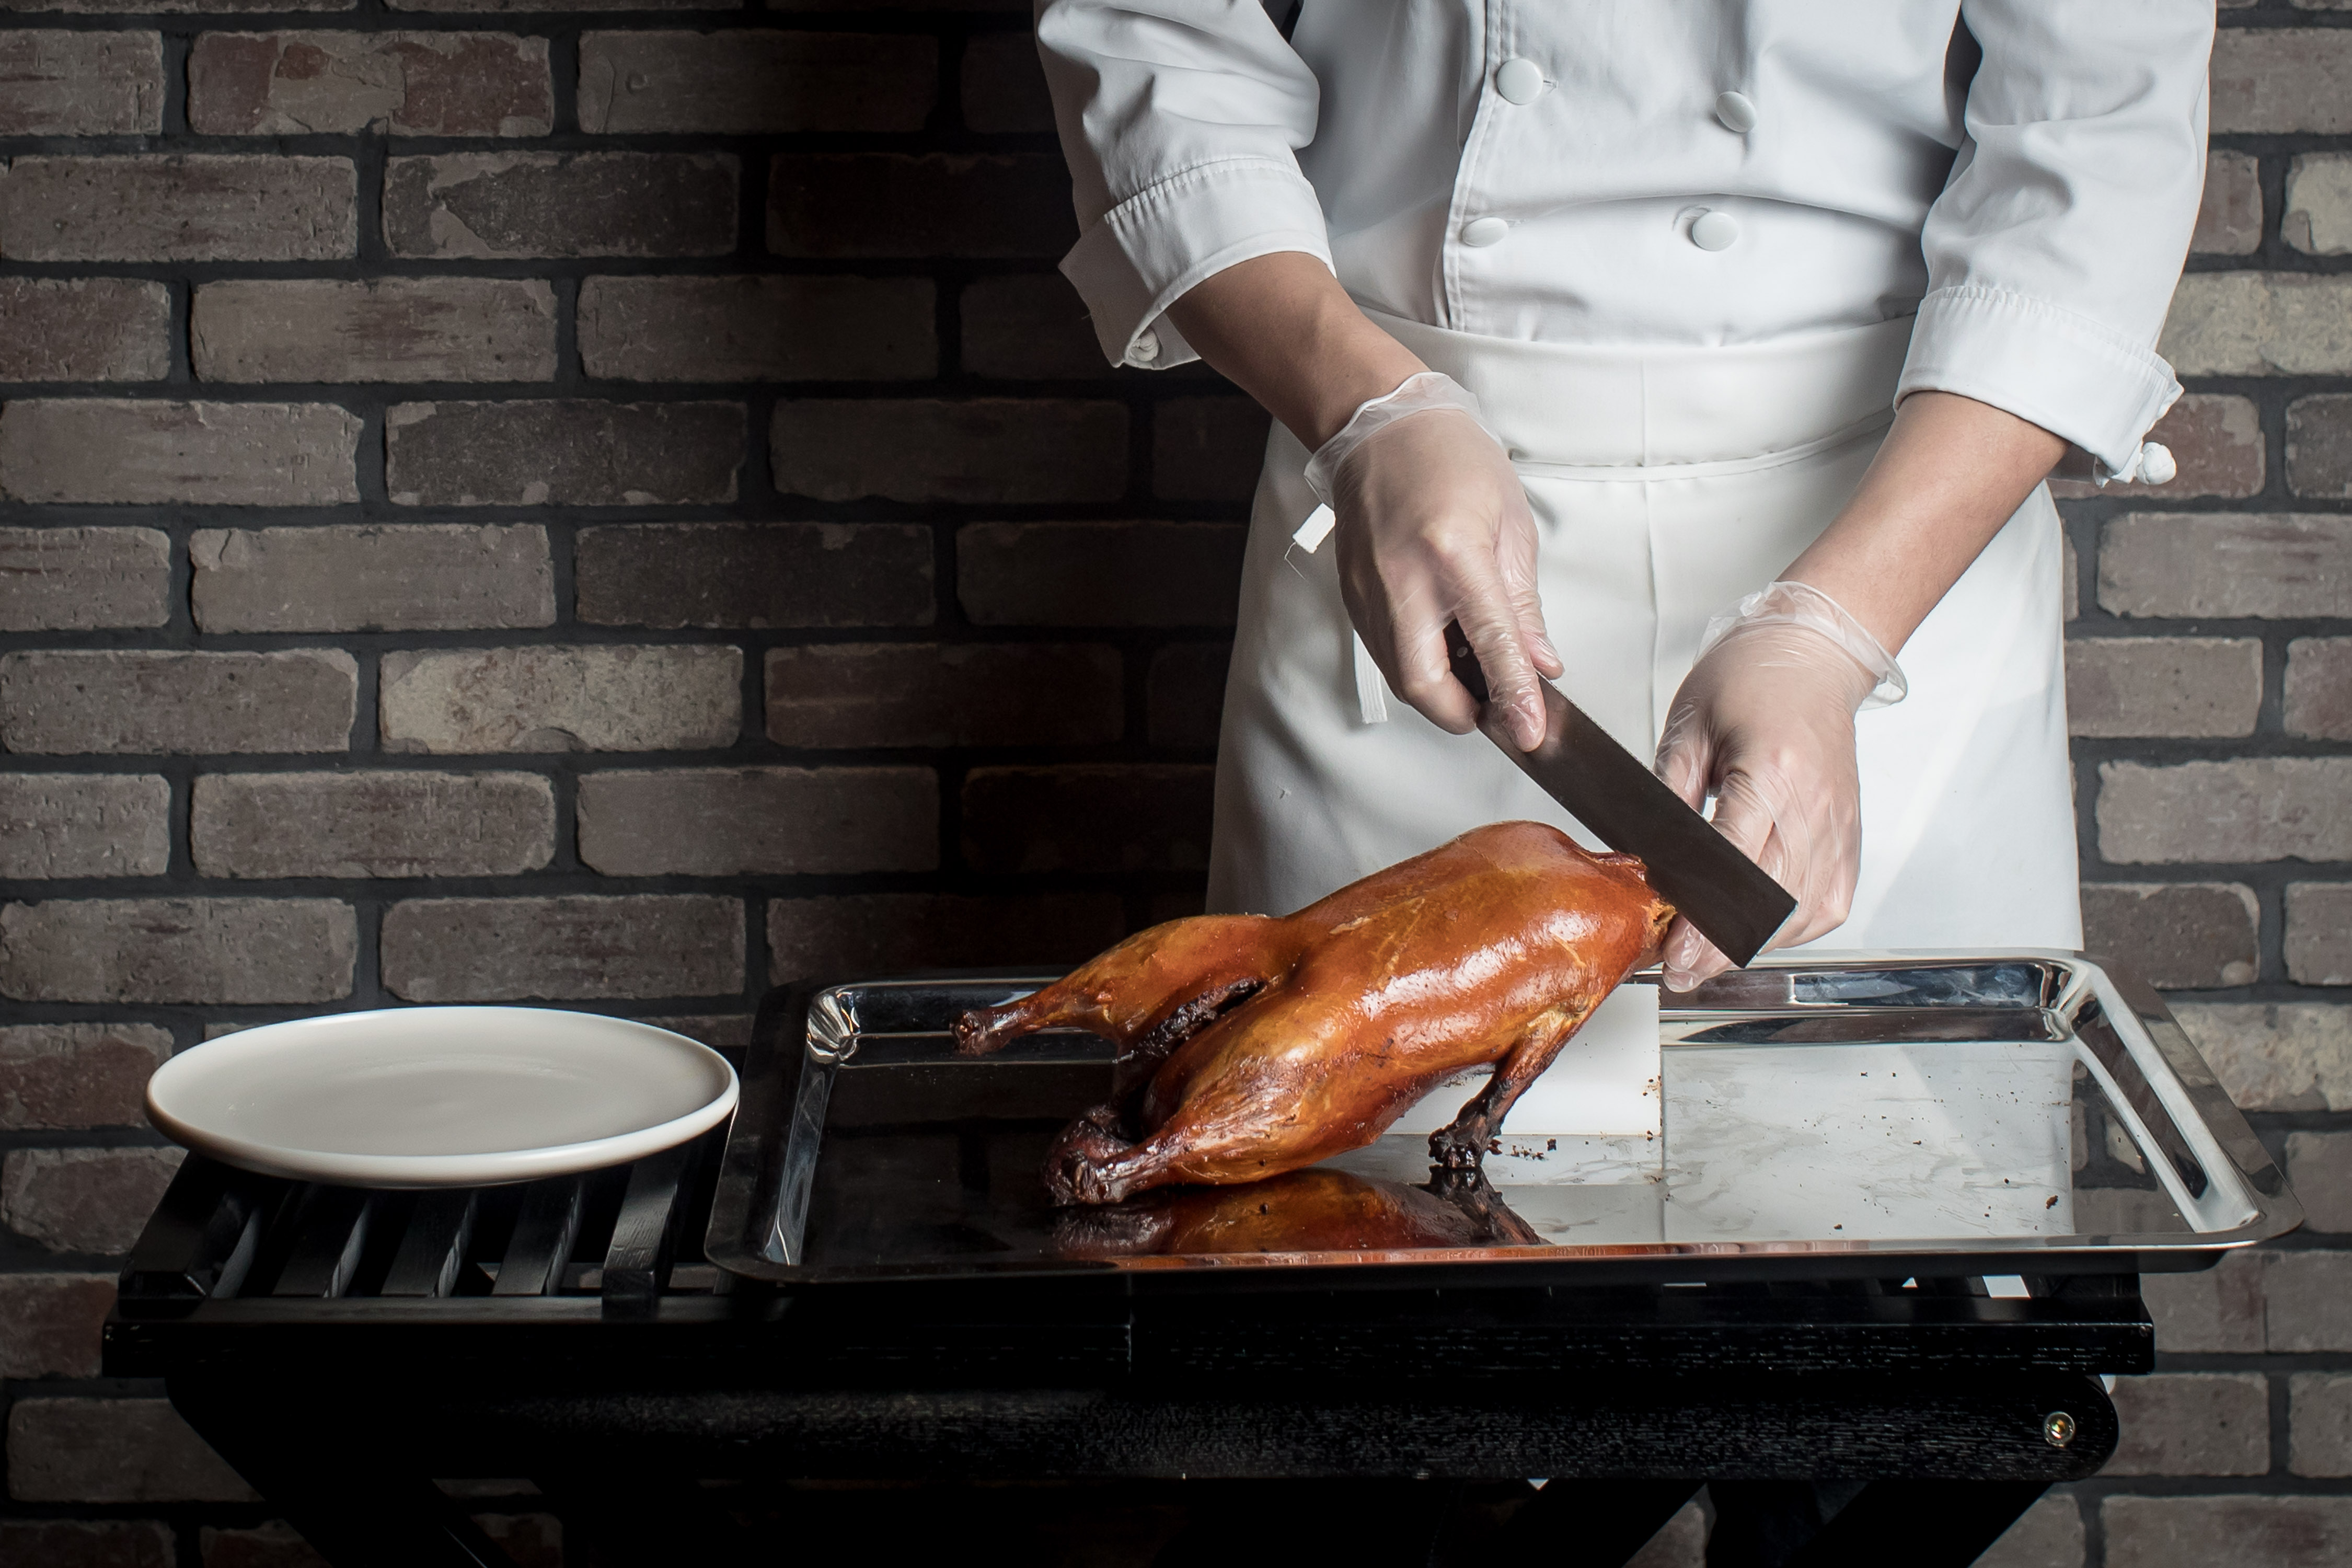 A chef carving a roasted duck with a flat-shaped knife. The duck is placed on a silver tray, and a white plate sits next to it.